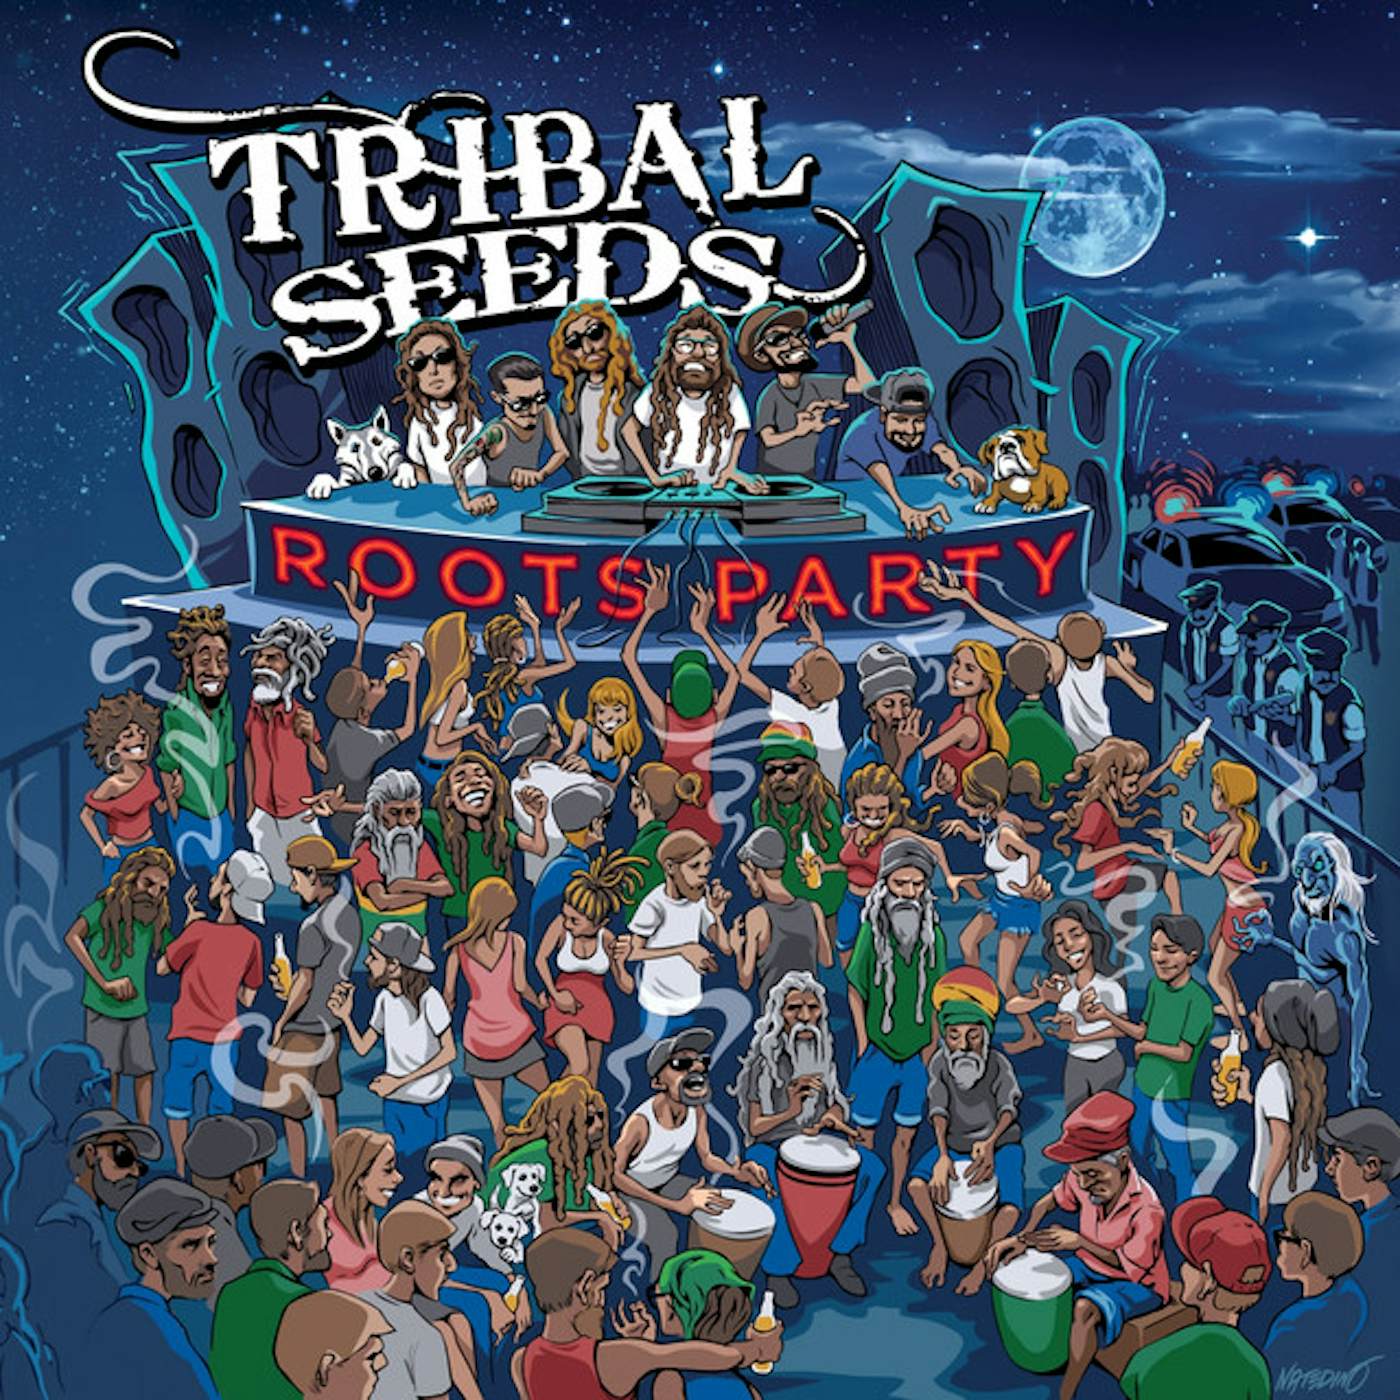 Tribal Seeds Roots Party Vinyl Record